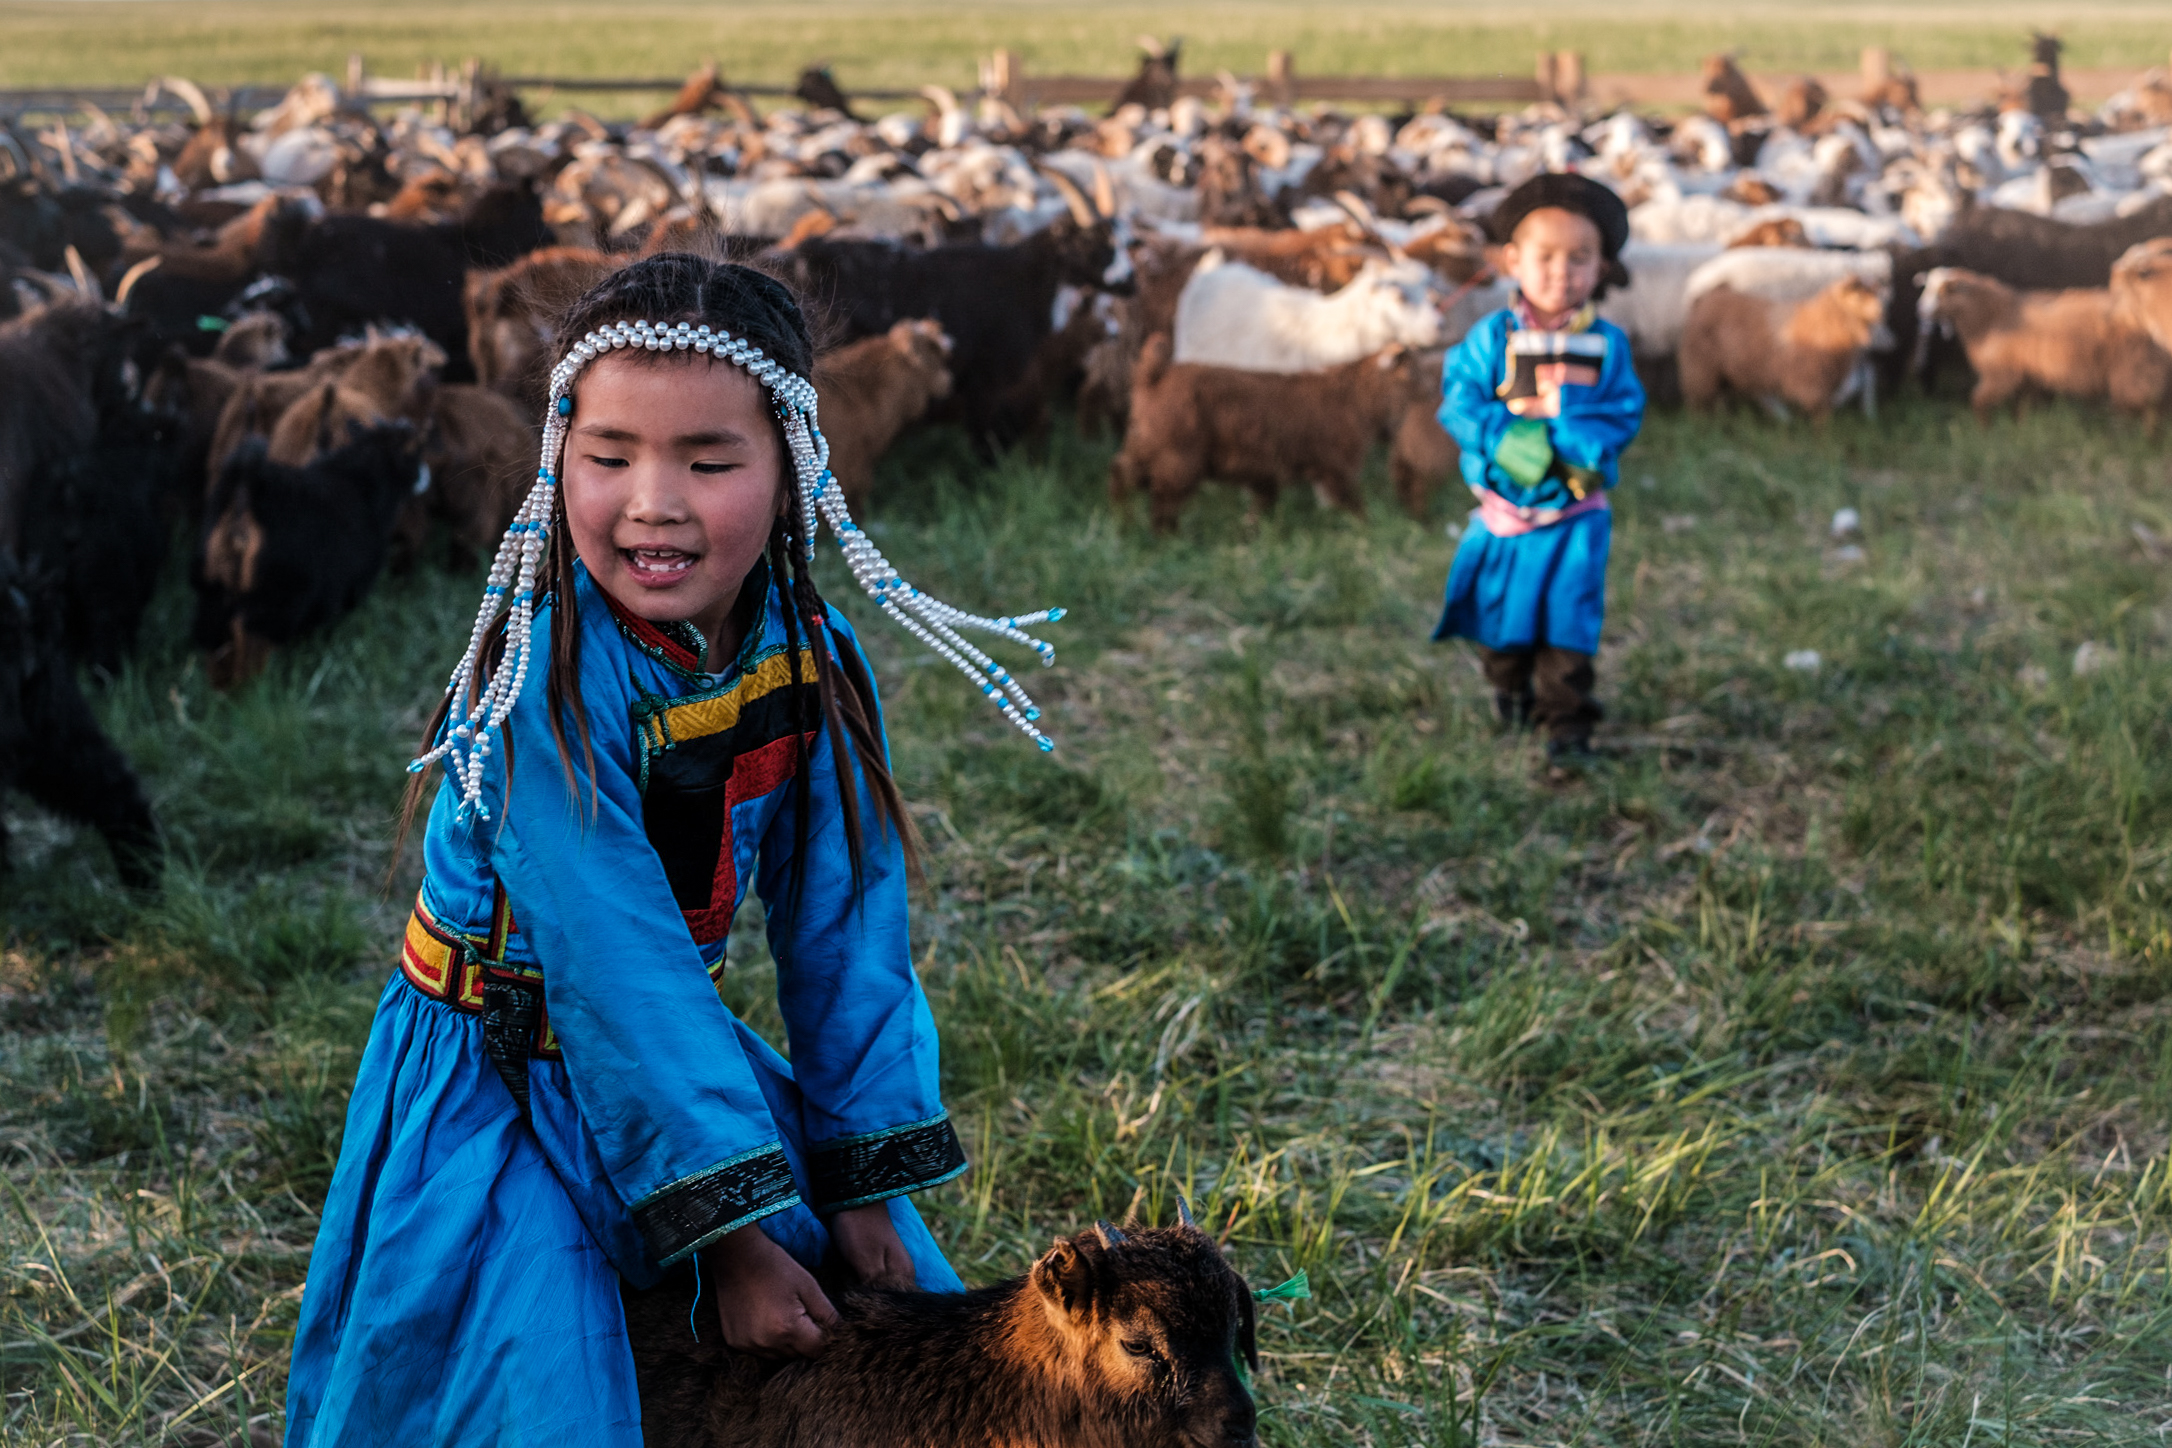 A photo of two laughing children wearing traditional Mongolian dress in a field with cashmere goats.